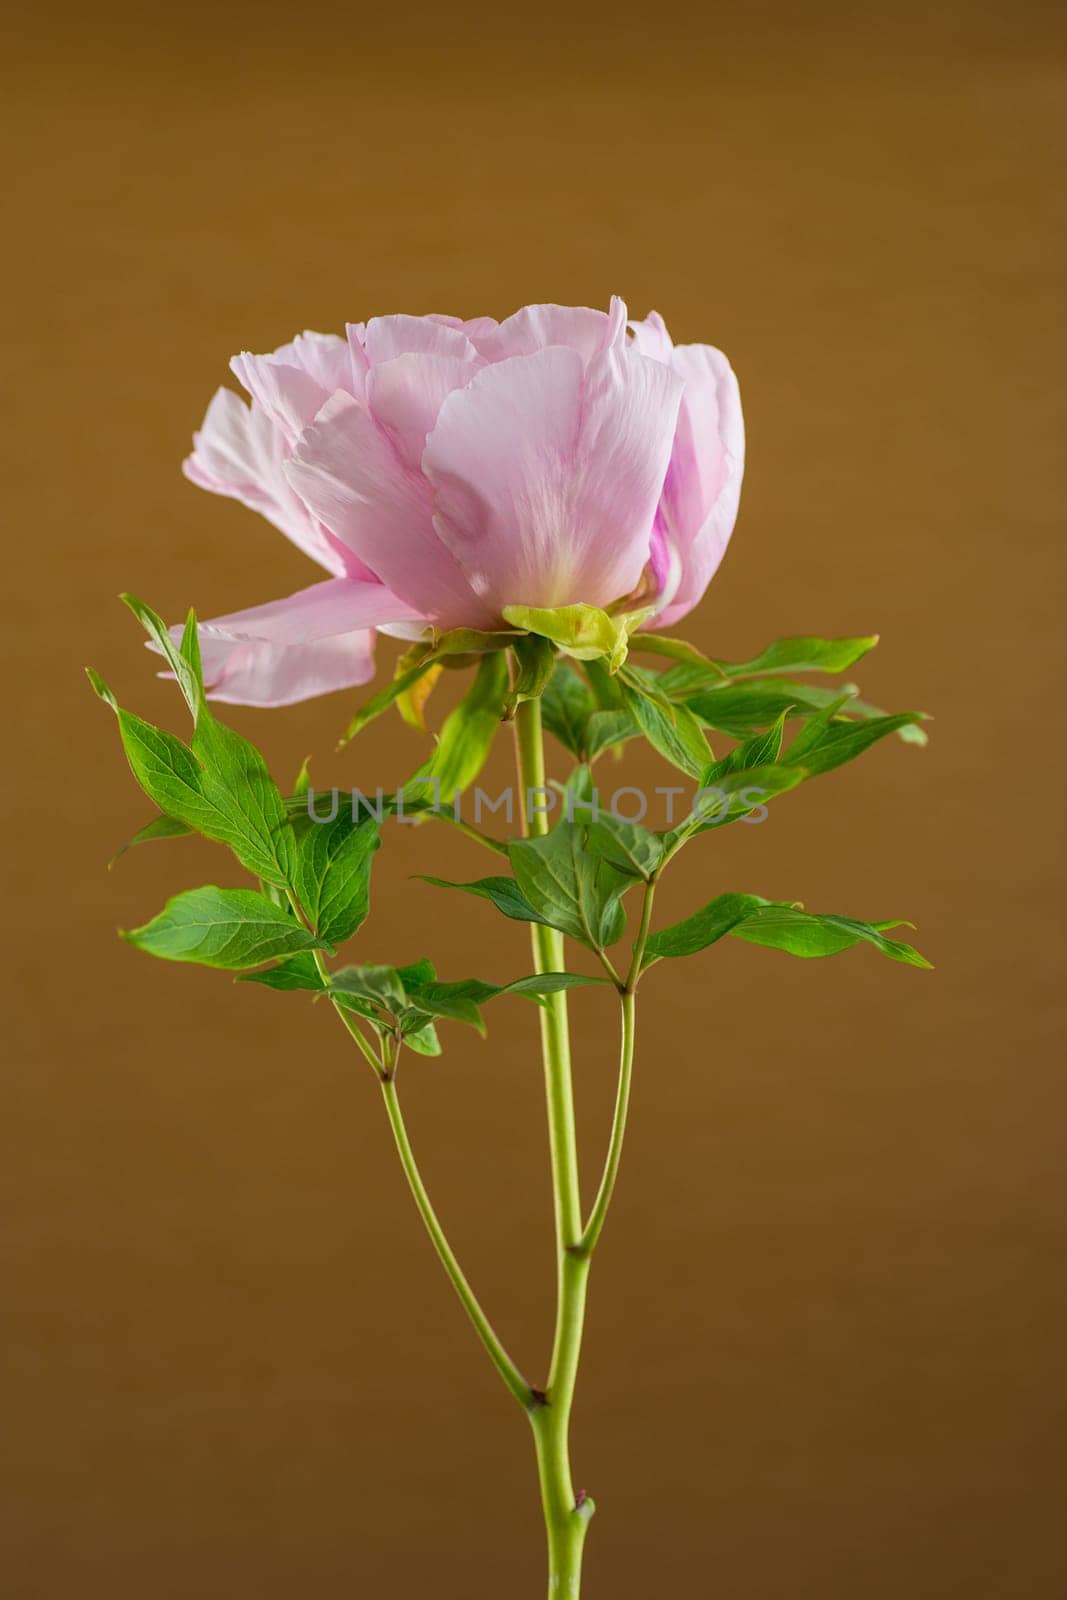 Pink tree peony flower, isolated on brown background by Rawlik